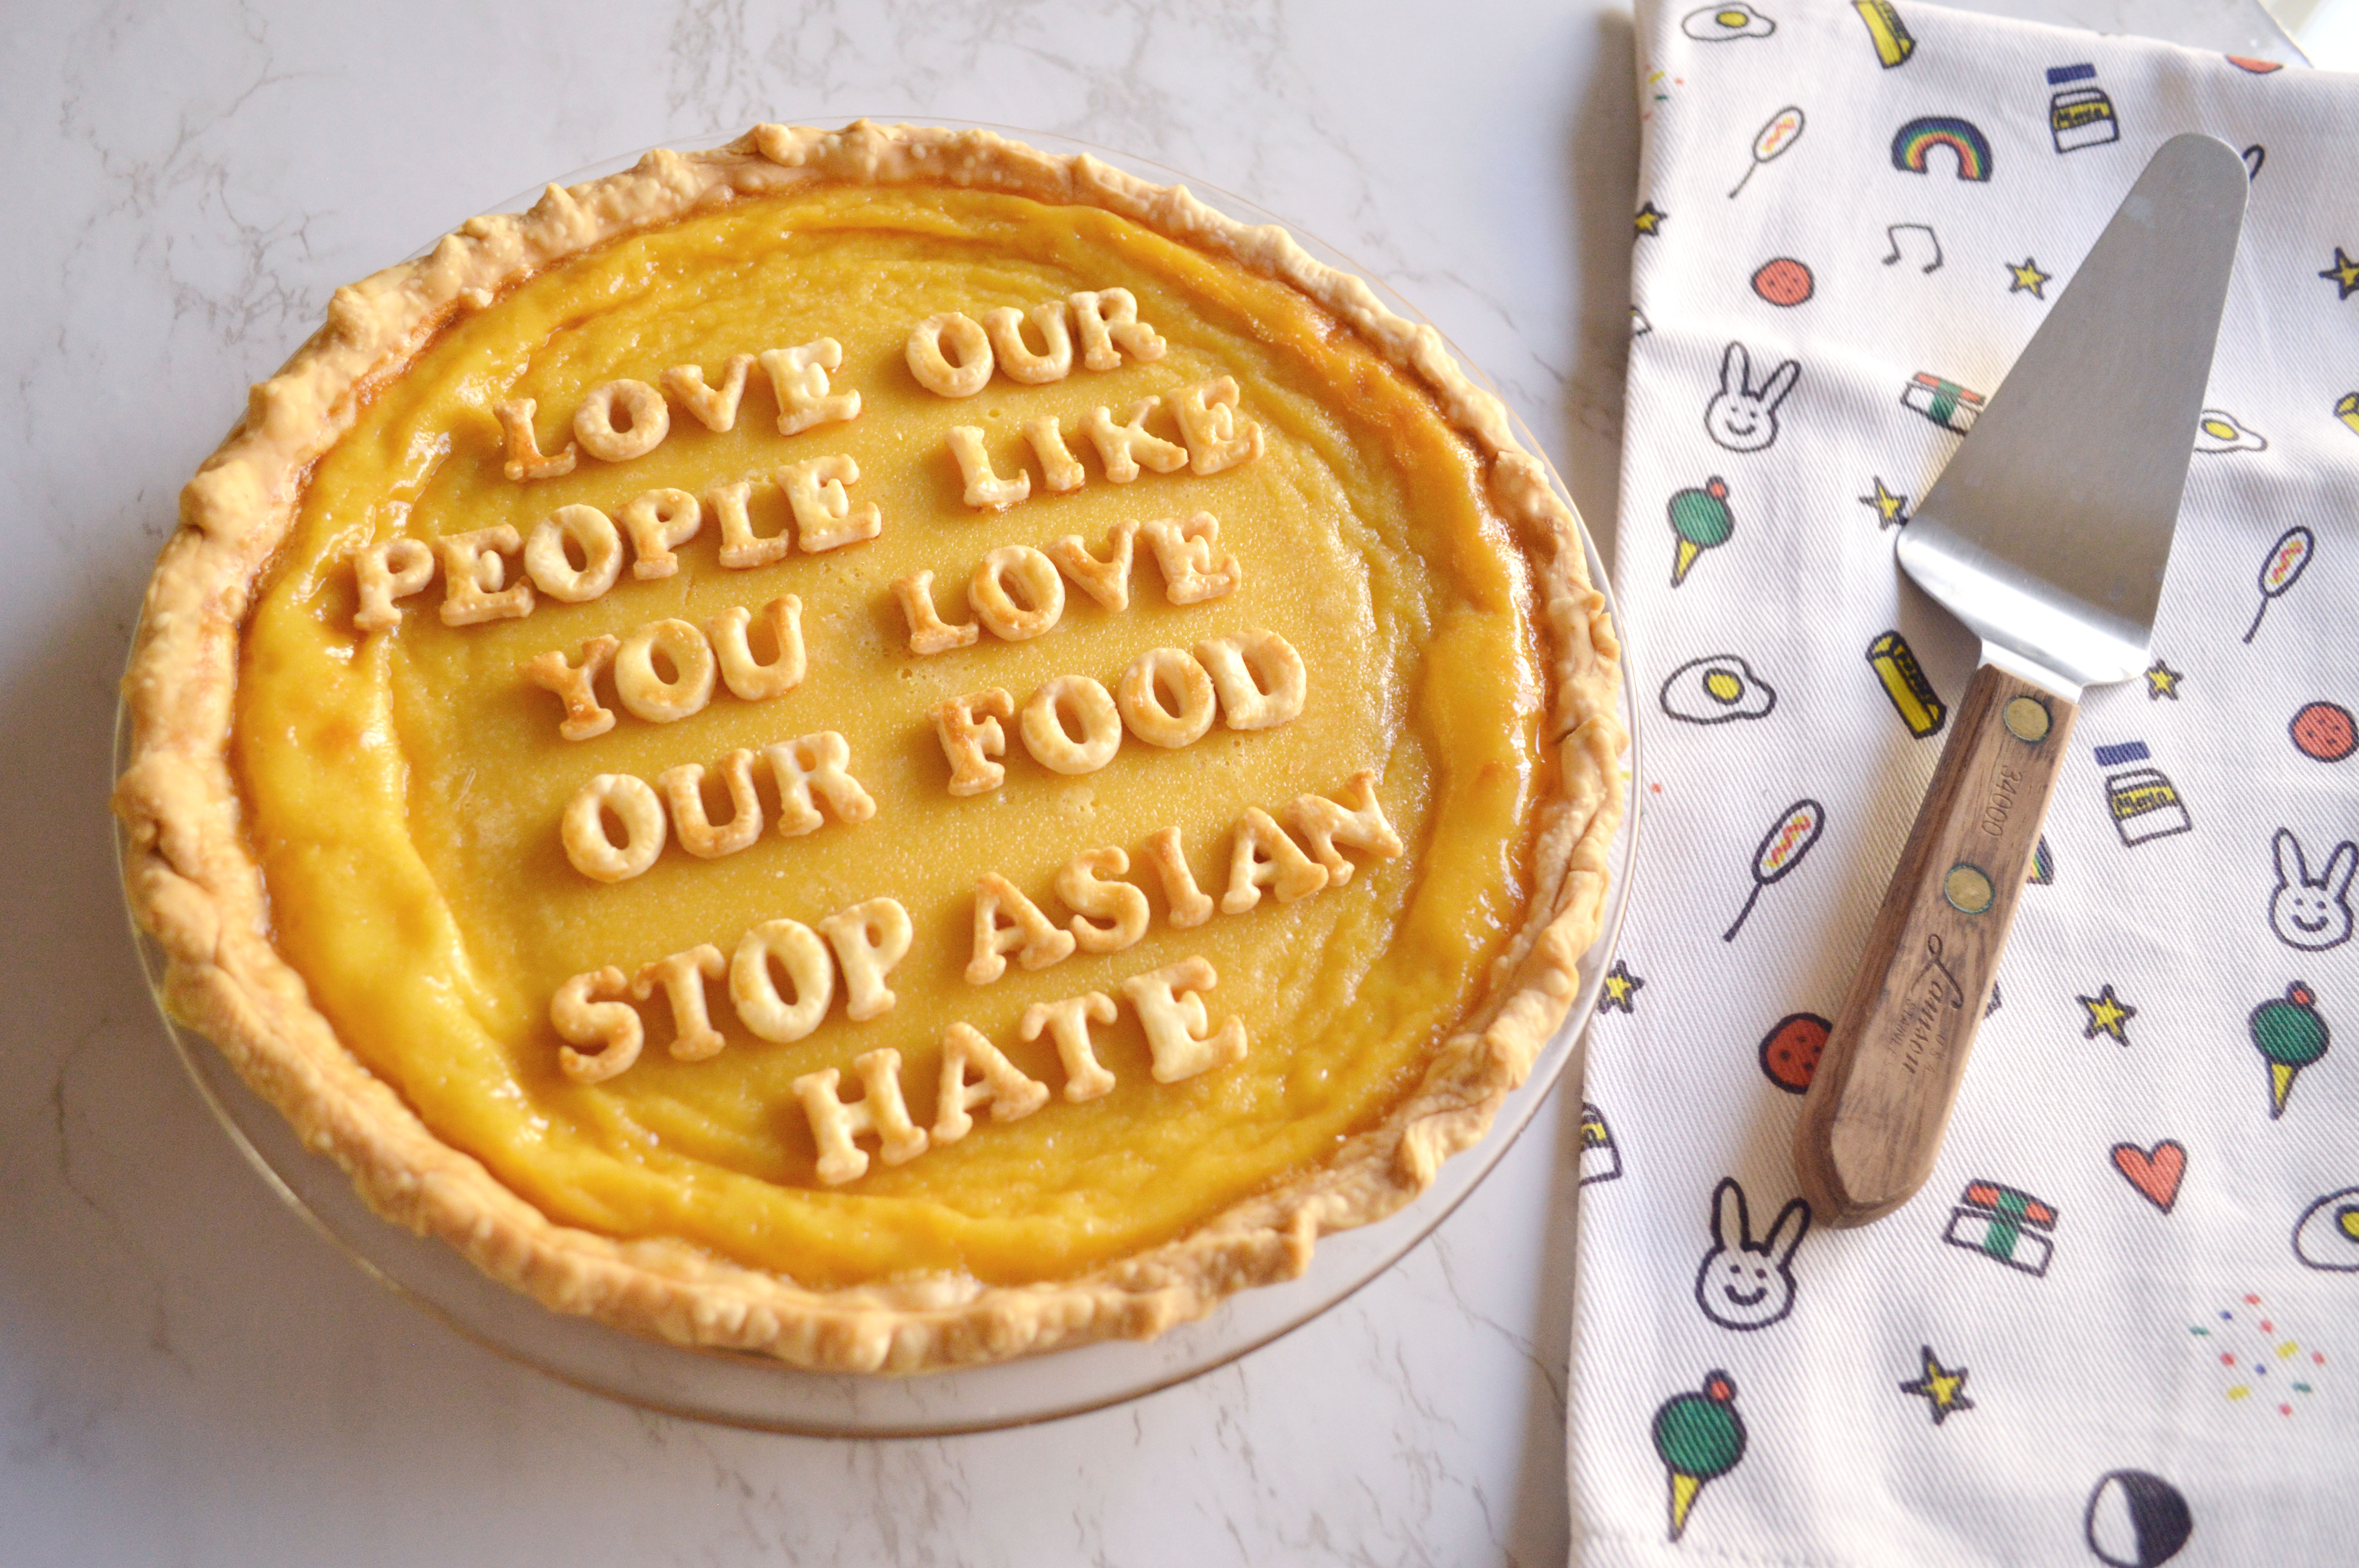 A giant egg tart sits in the lower left corner with pie crust letters spelling out "Love Our People Like You Love Our Food". It sits on a Molly Yeh No Kid Hungry dish towel with a pie turner on it's righthand side.